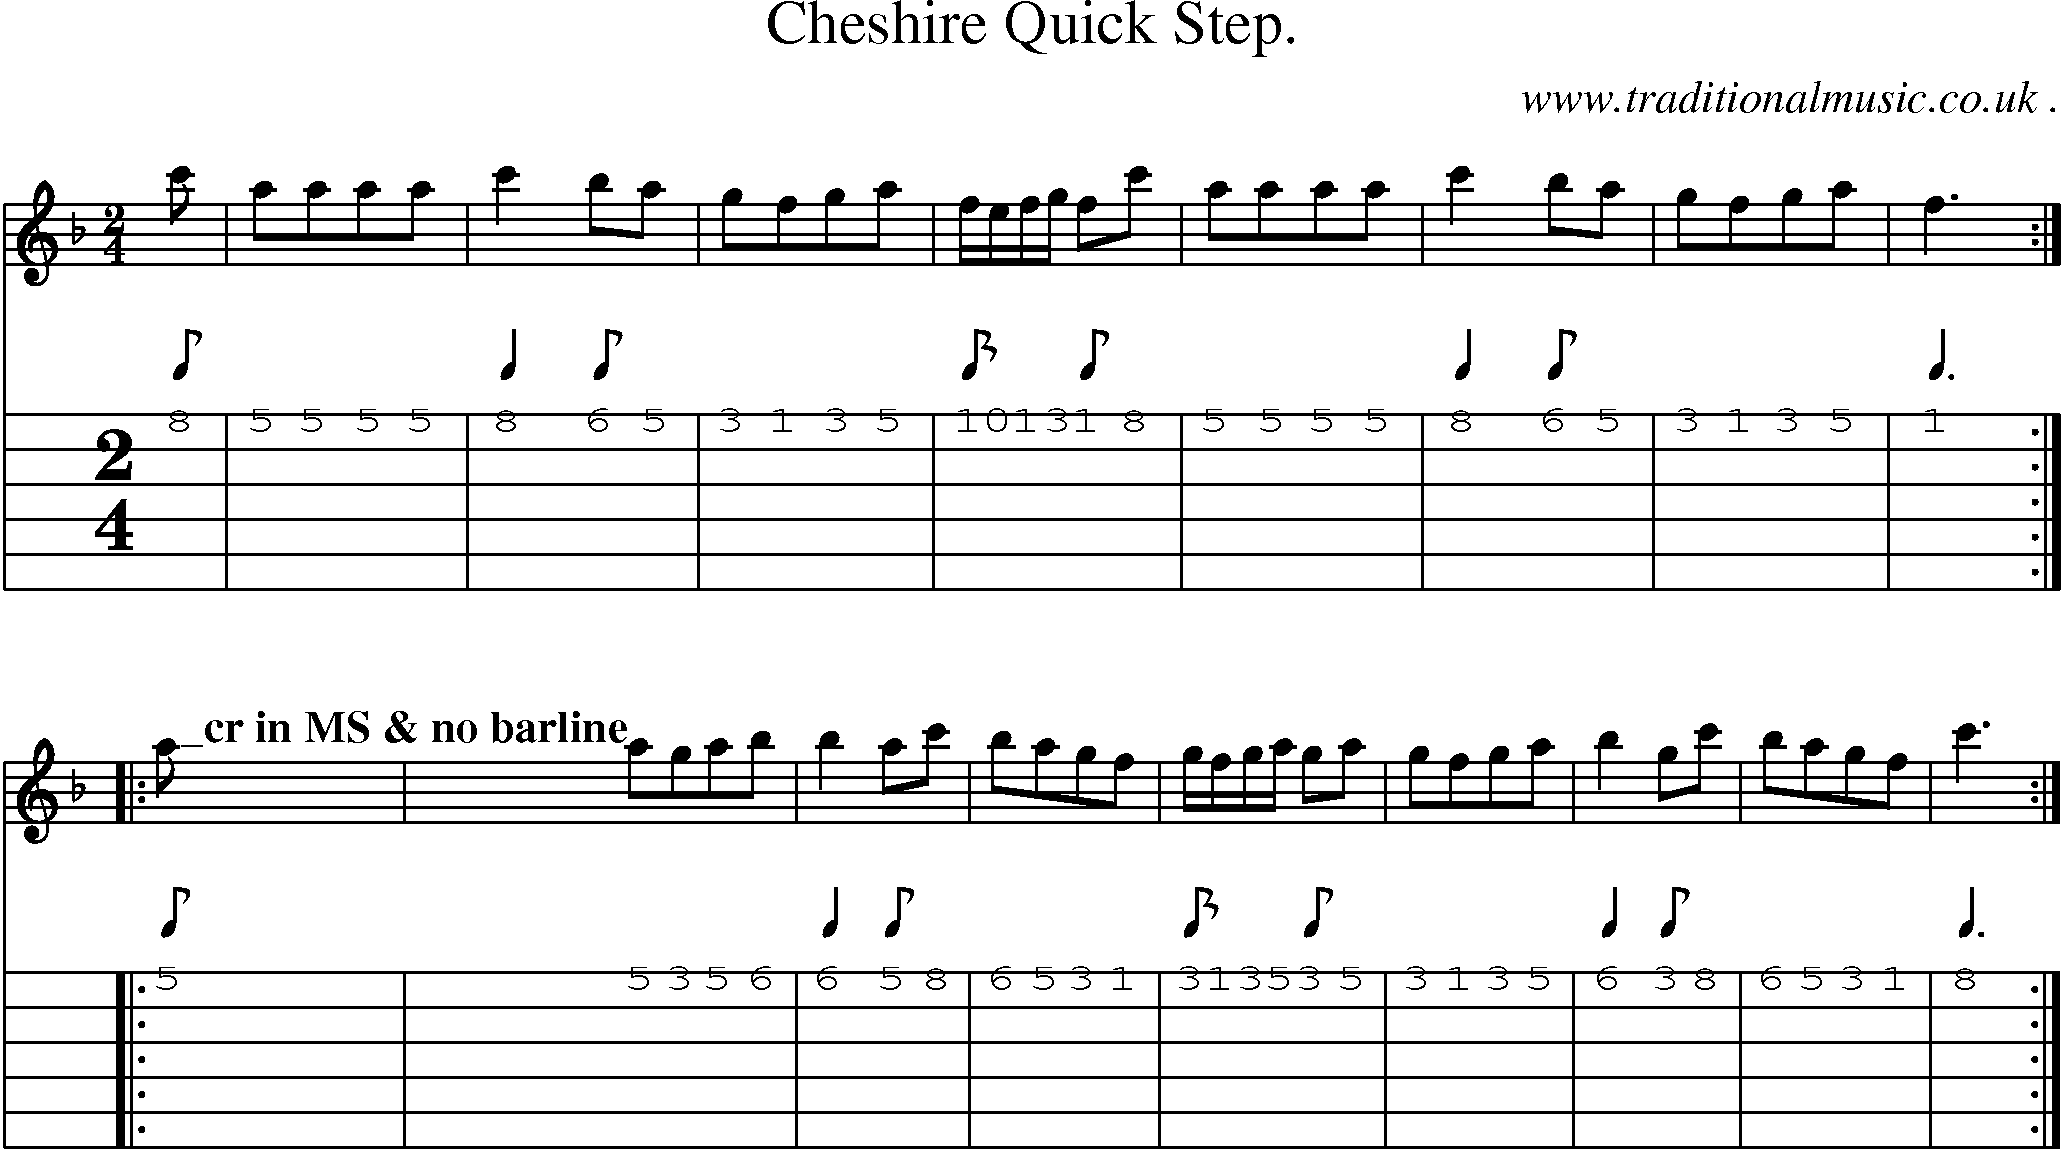 Sheet-Music and Guitar Tabs for Cheshire Quick Step